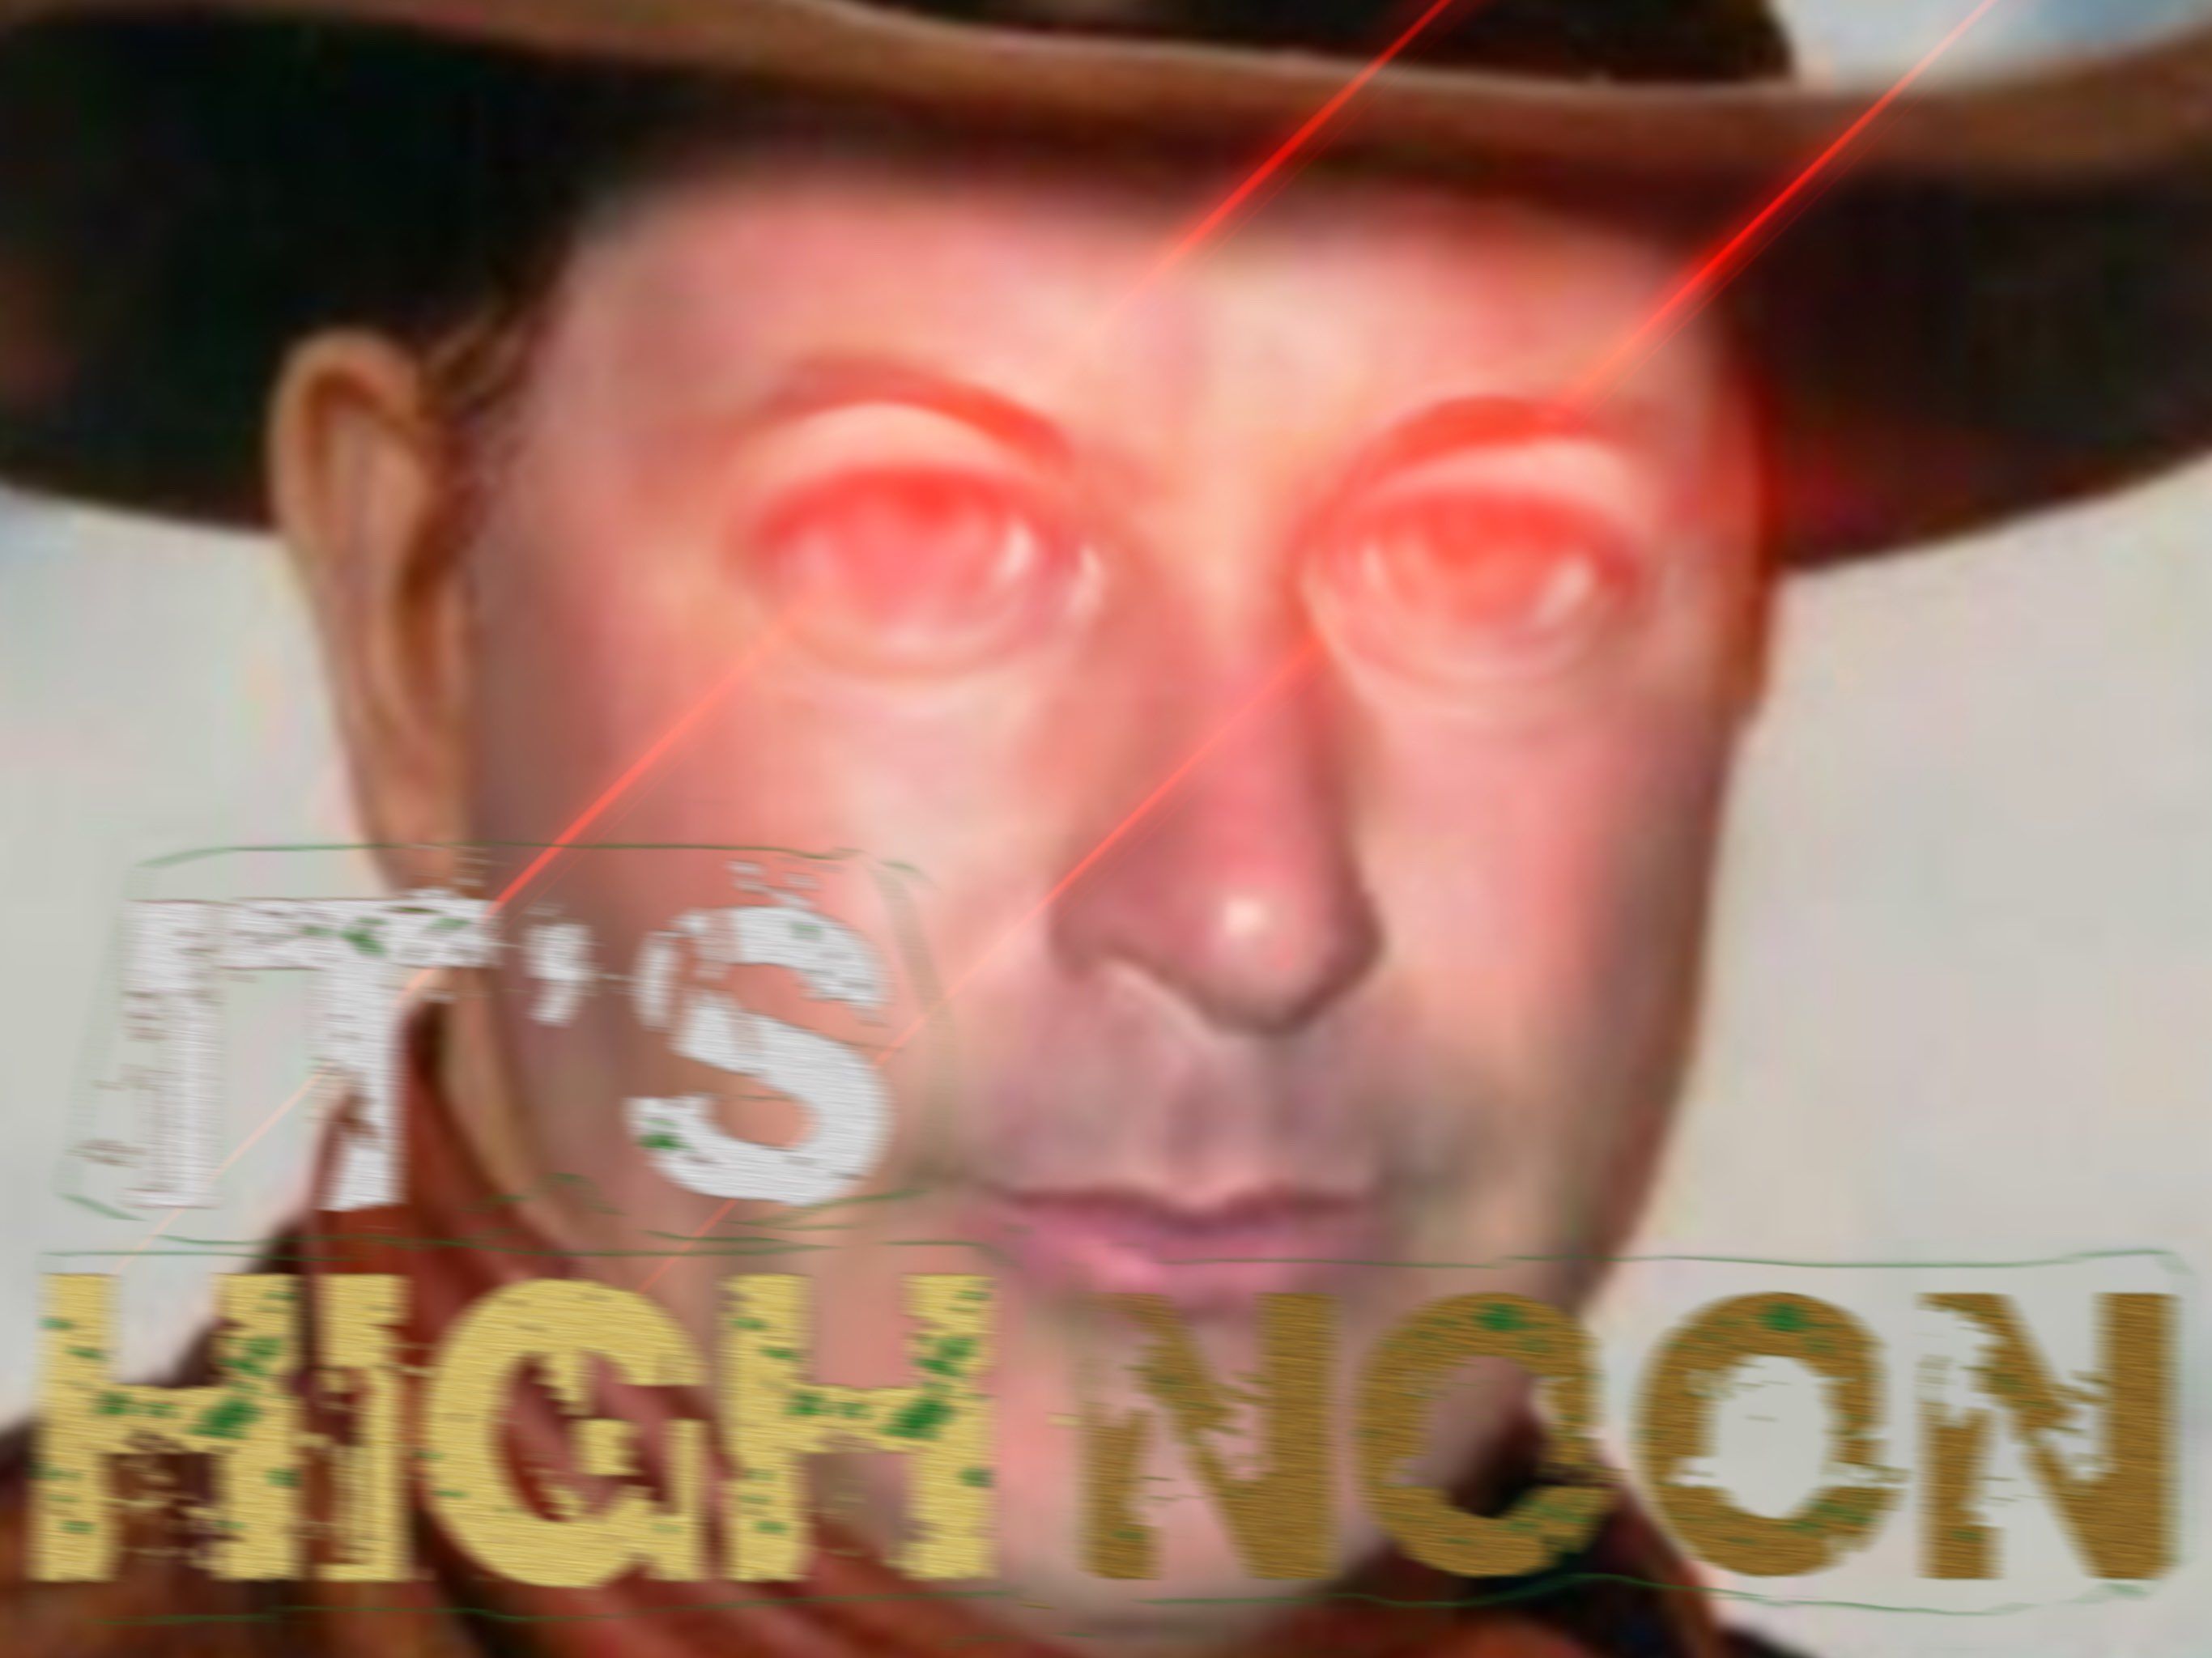 iTs hIGh nOoN